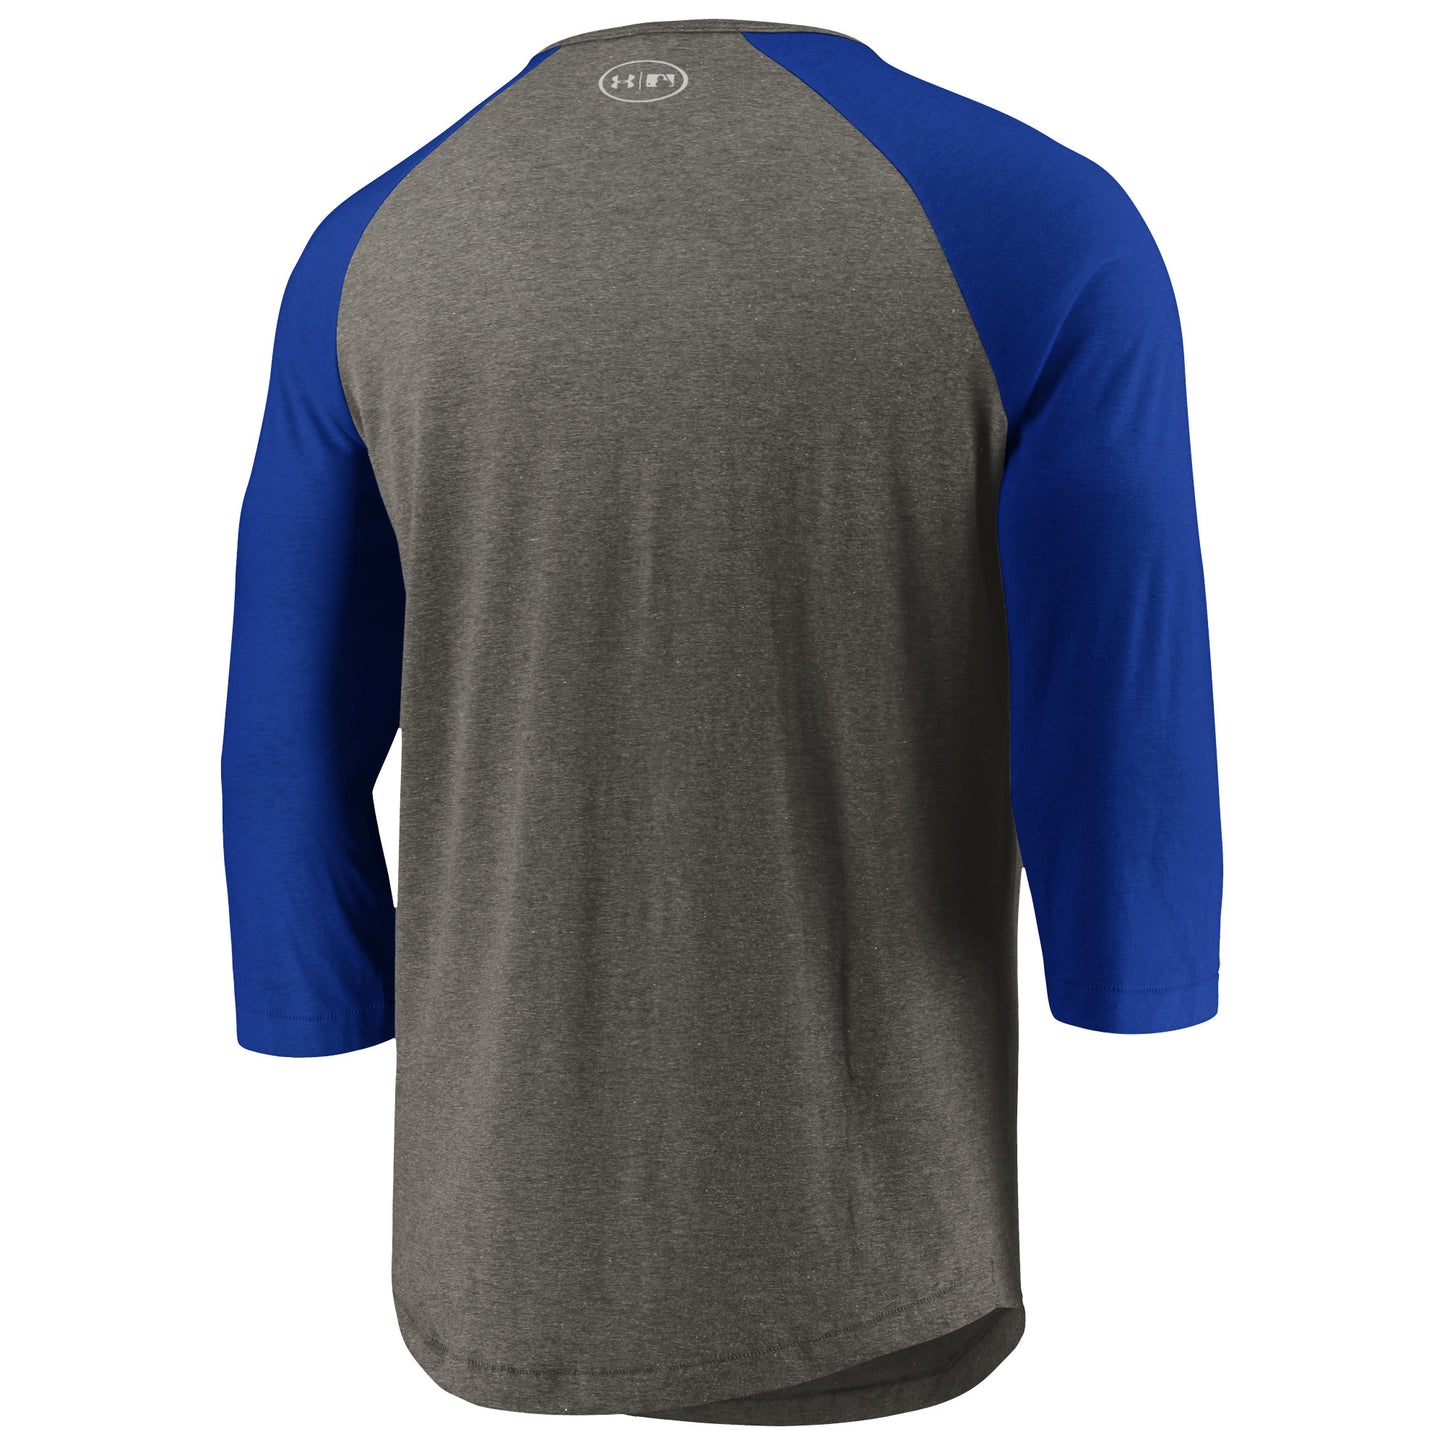 Men's Chicago Cubs Under Armour Heathered Gray/Blue Tri-Blend Property Of 3/4-Sleeve Performance T-Shirt